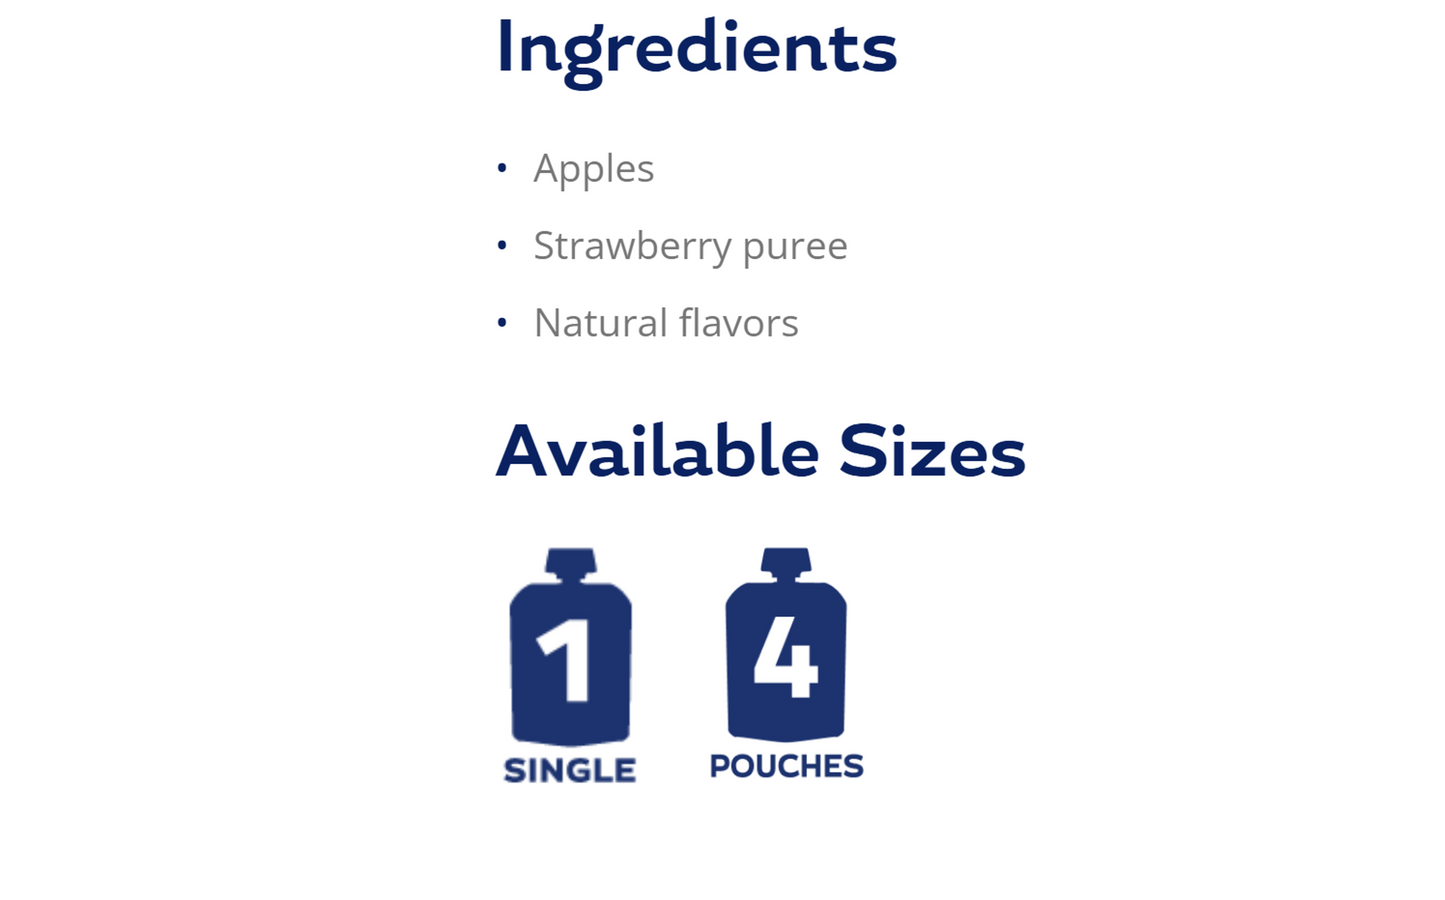 Simple ingredients and available sizes of Buddy Fruits Strawberry & Apple fruit pouch.